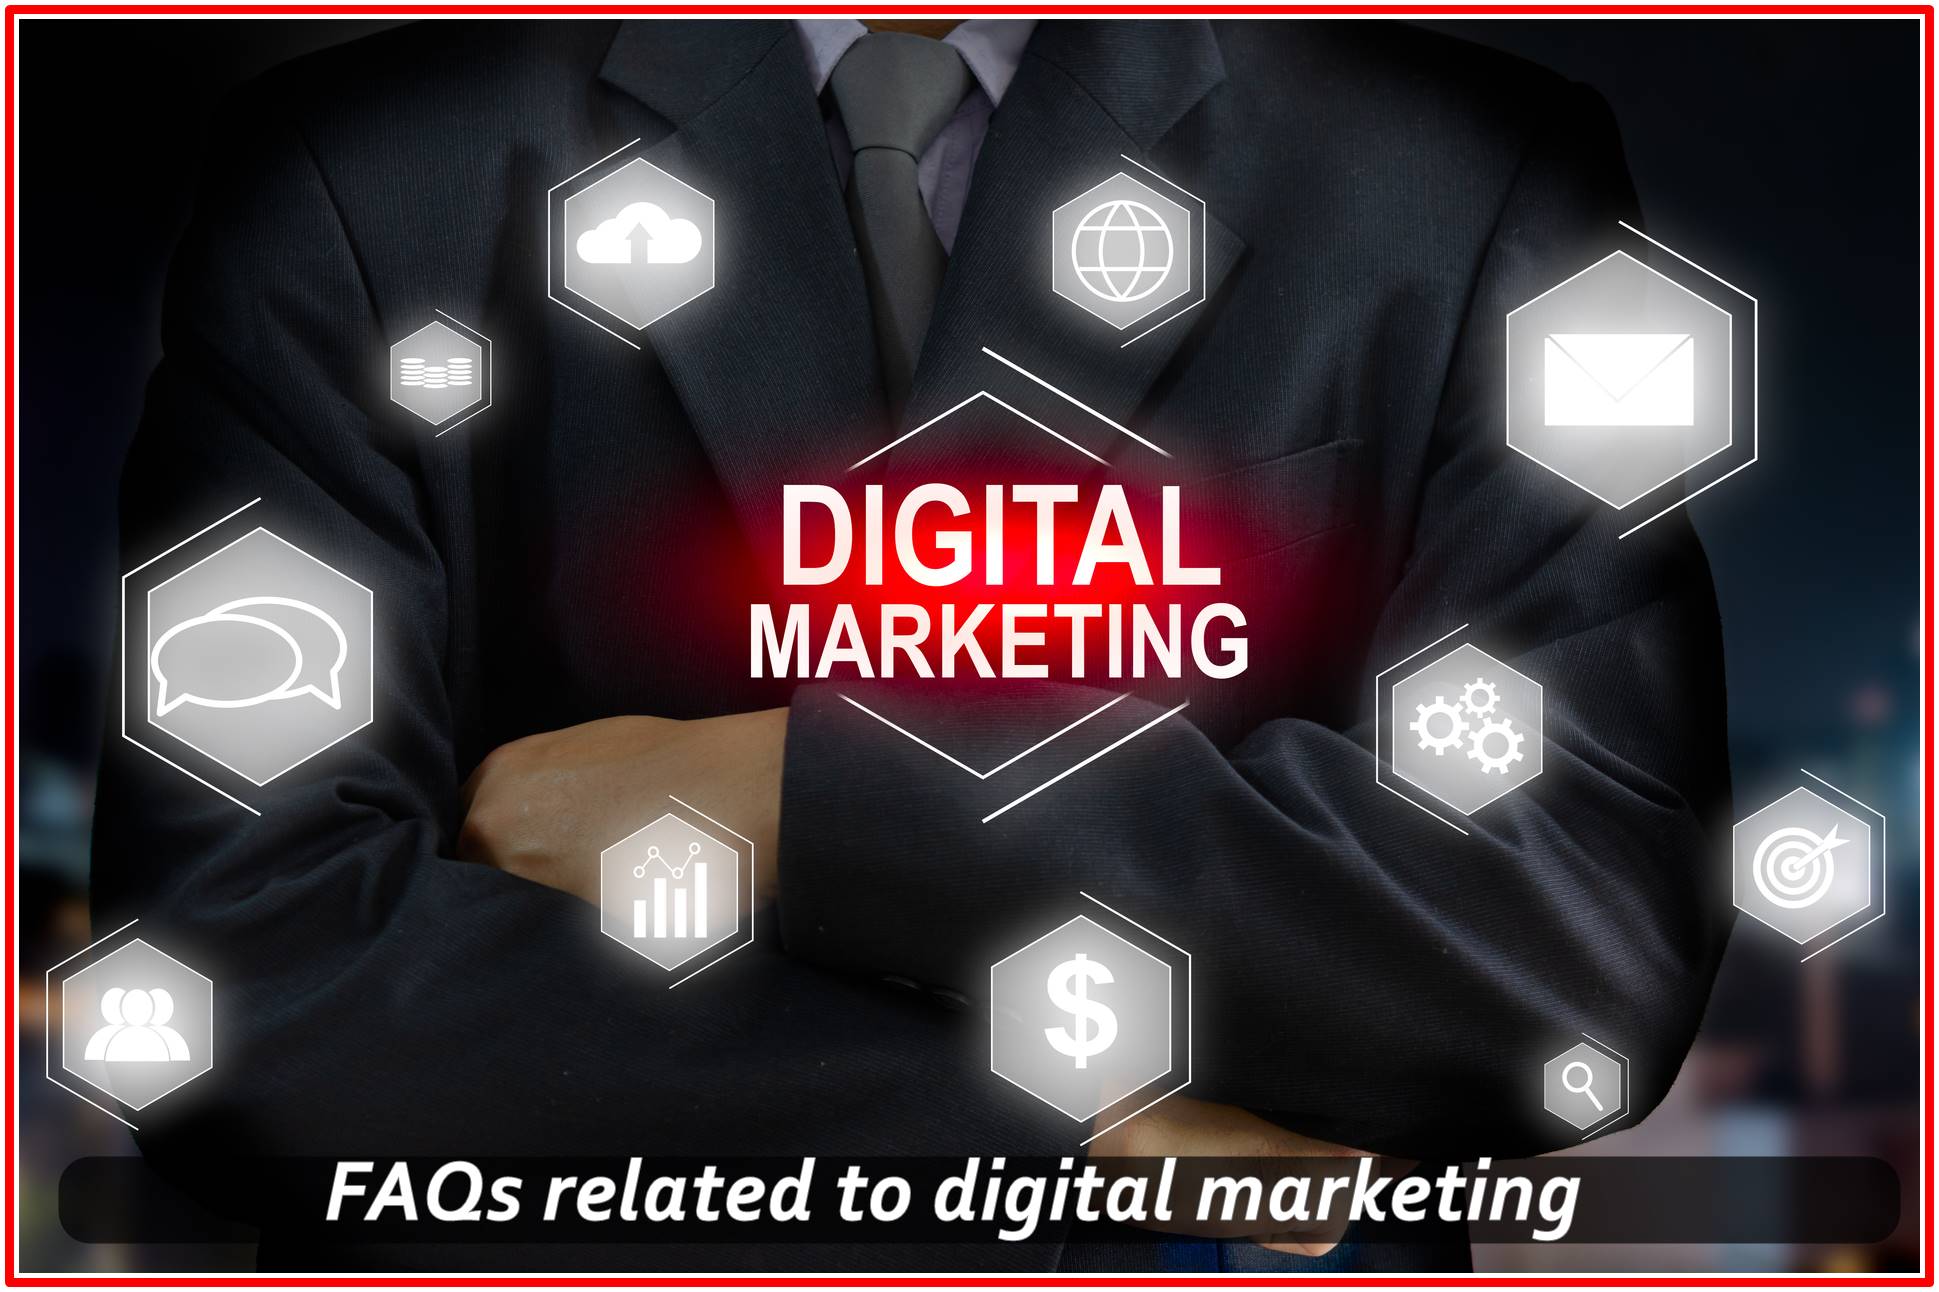 FAQs related to digital marketing